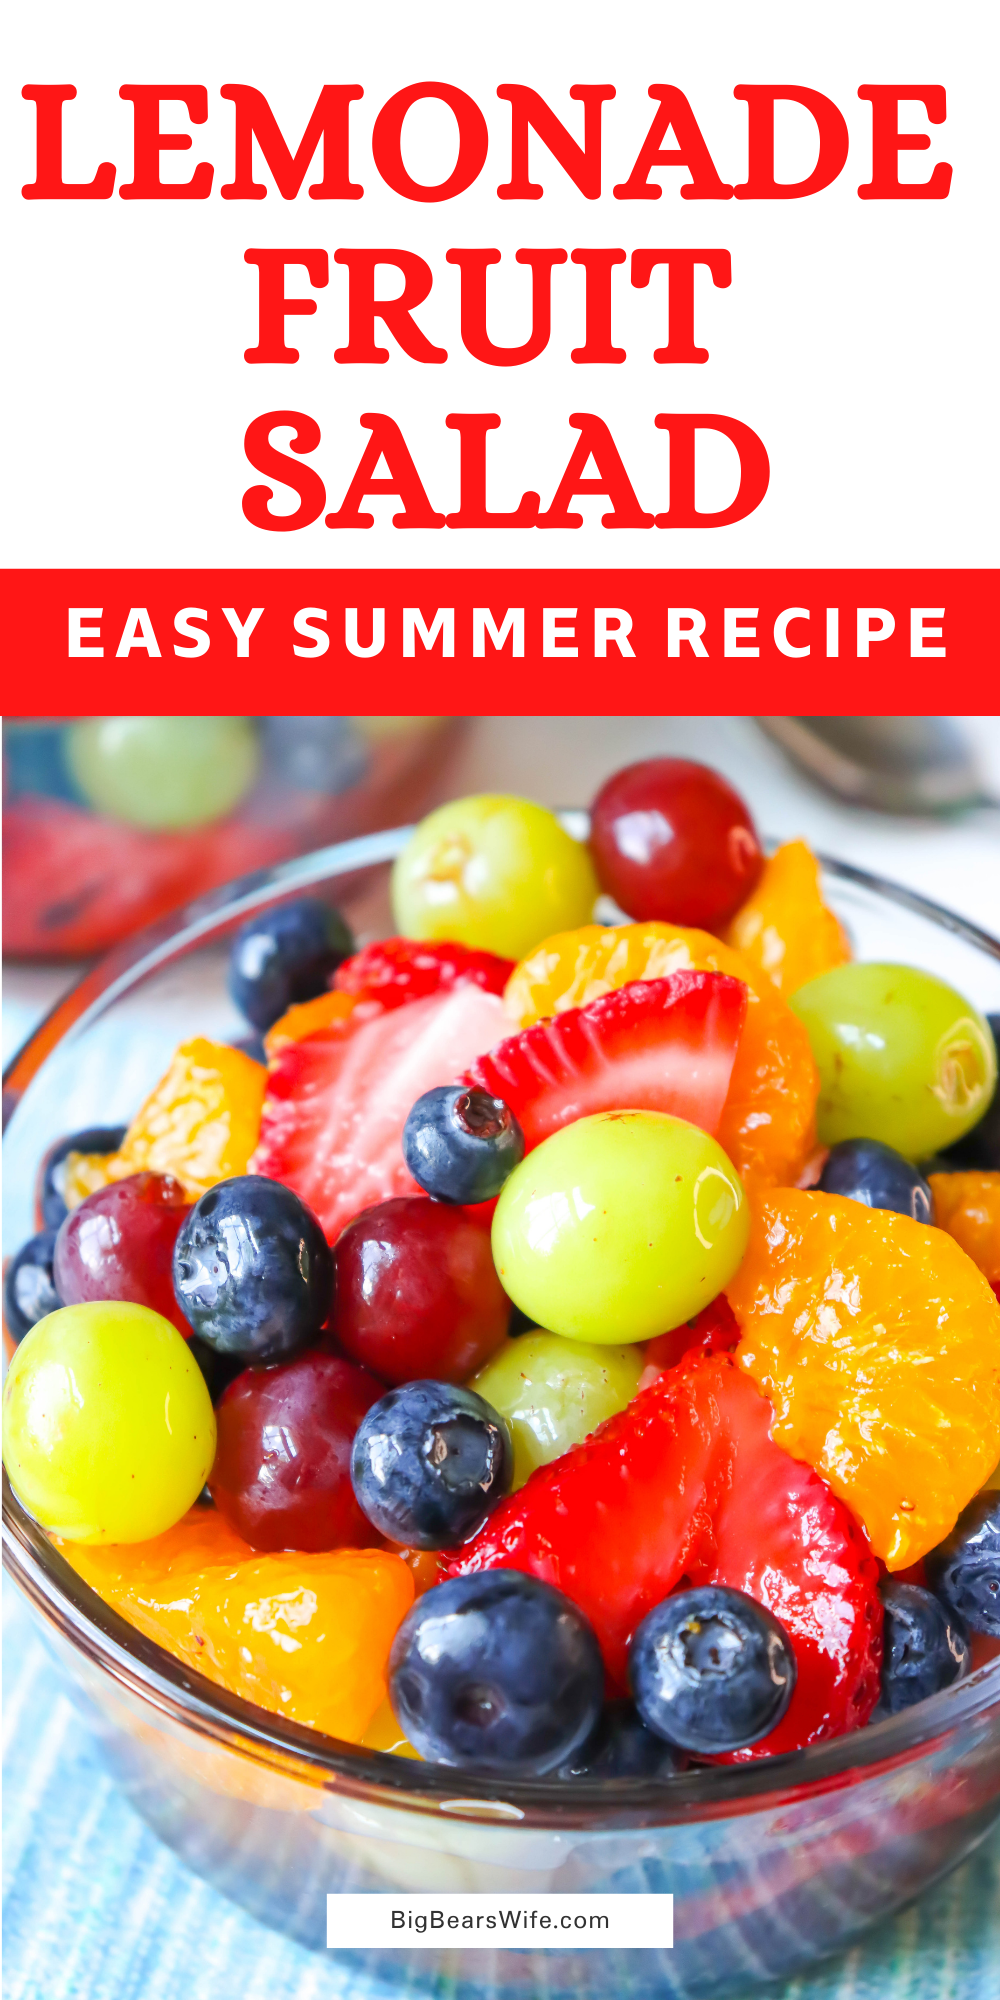 This easy Lemonade Fruit salad is made with fresh fruit and frozen lemonade, for that perfect summer fruit salad!  via @bigbearswife